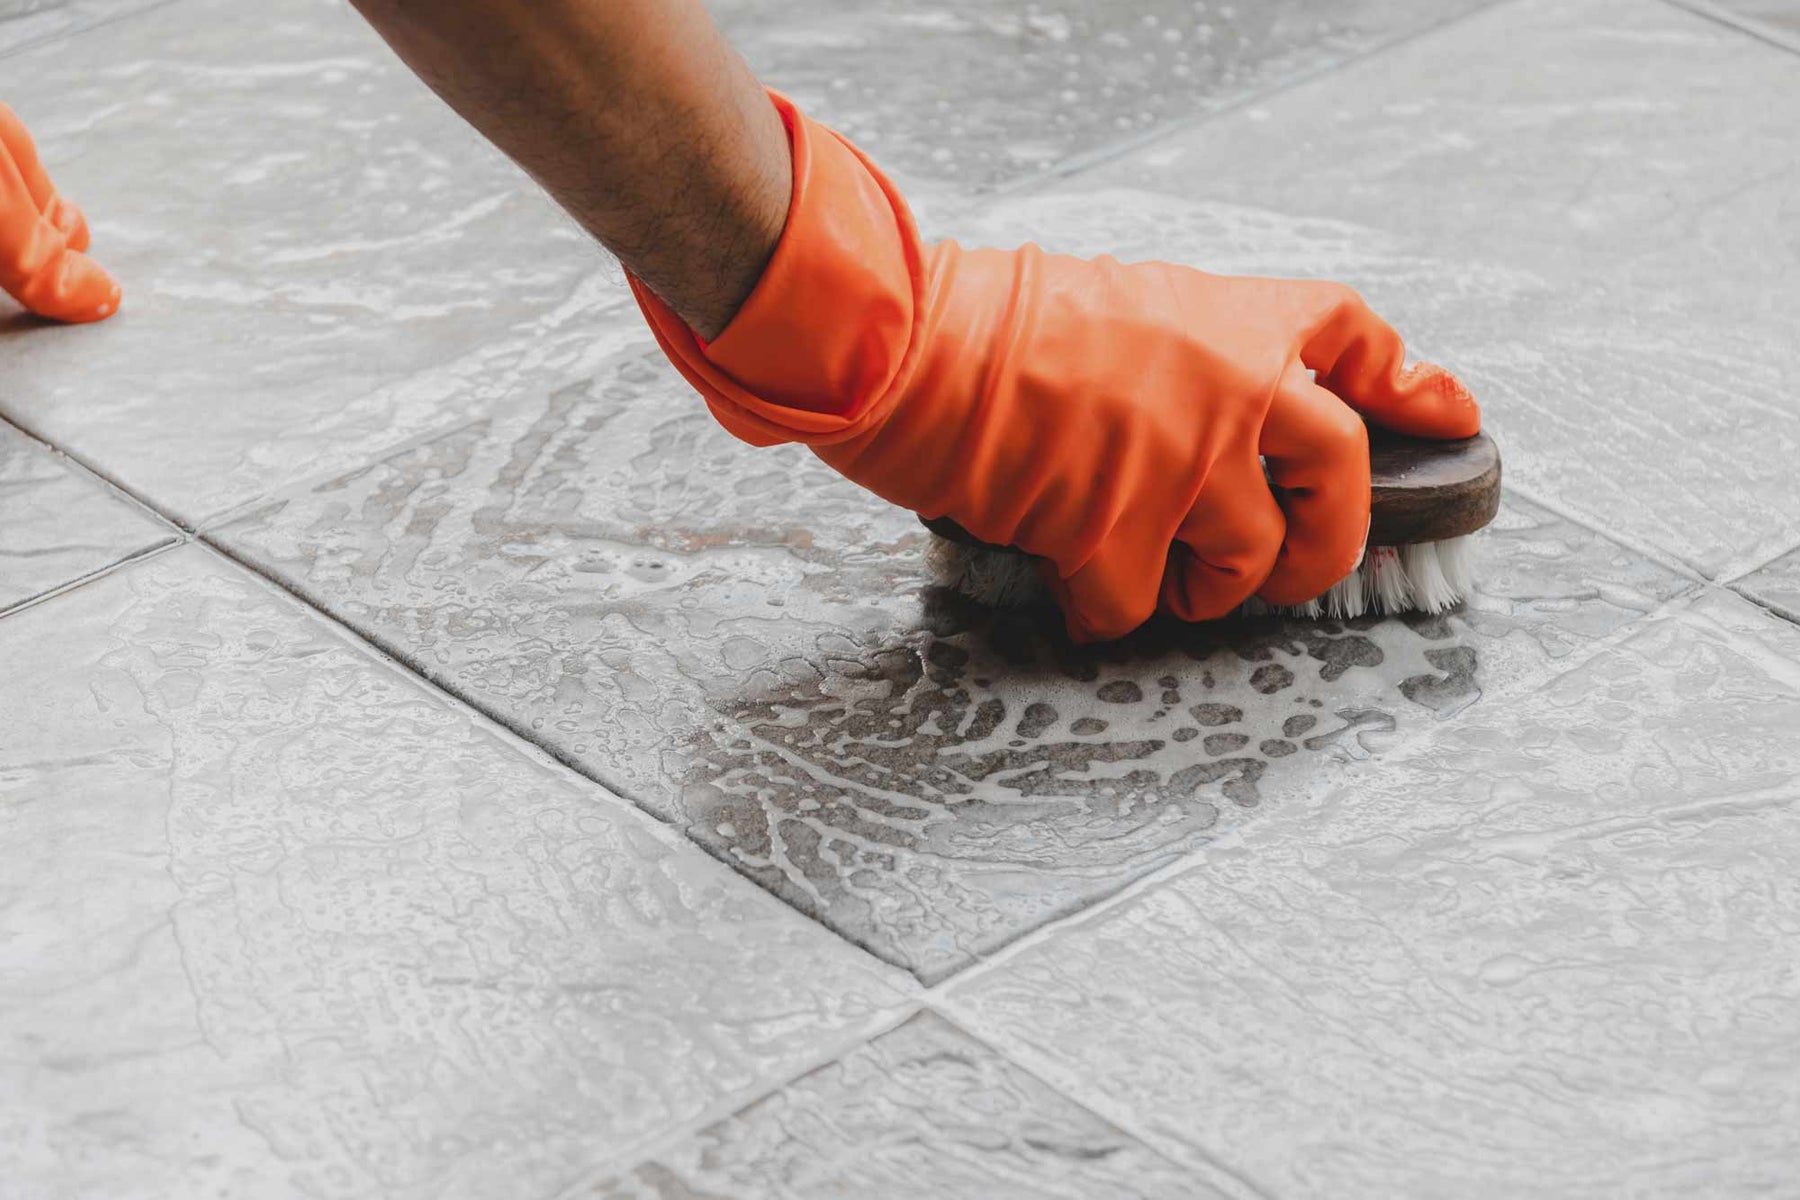 rubber gloves and brush with cleaning solution cleaning outdoor tiles.